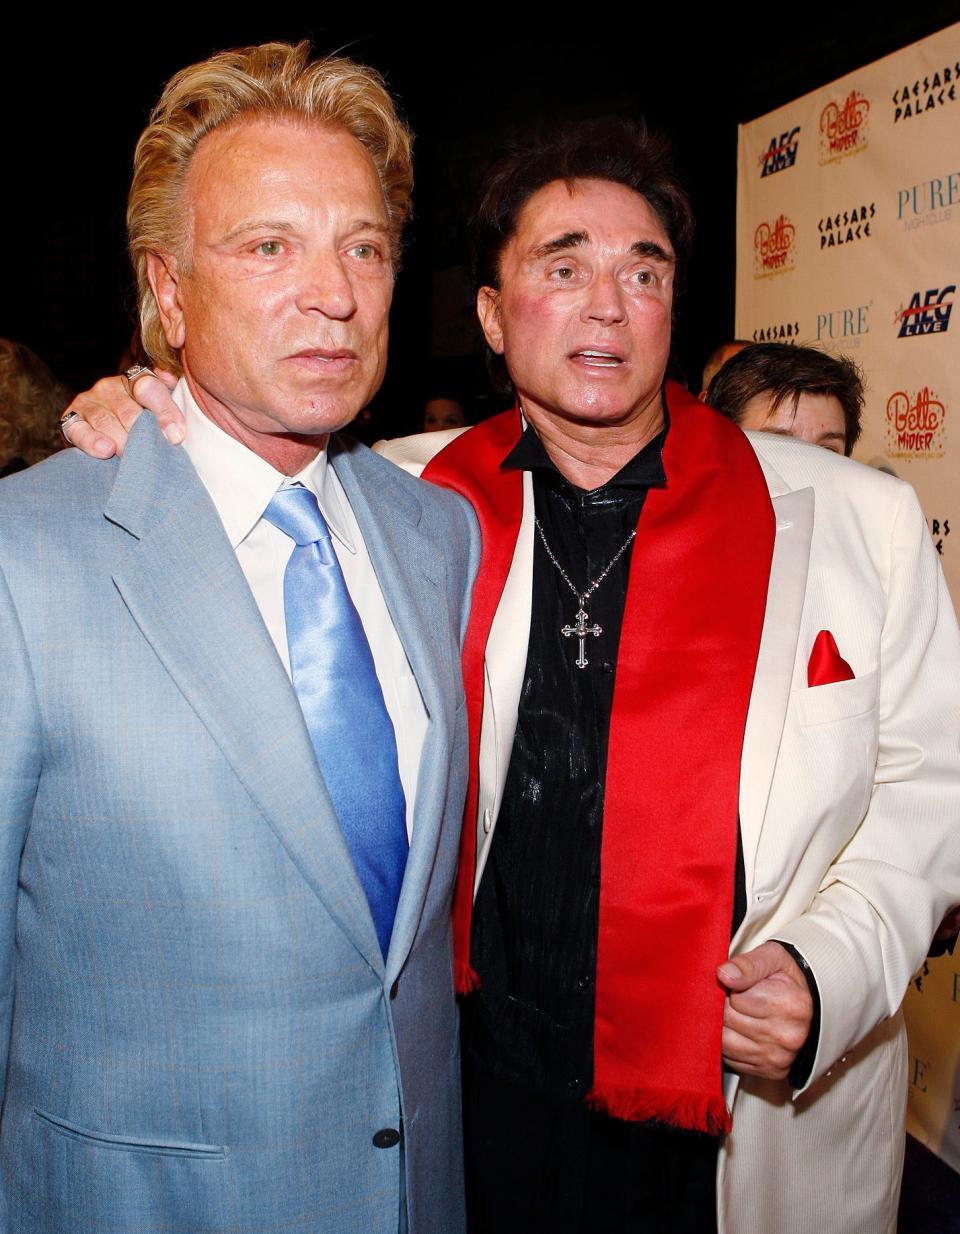 In this Feb. 20, 2008 file photo, Siegfried Fischbacher, left, and Roy Horn arrive at a party following the premiere performance of Bette Midler's "The Showgirl Must Go On" at Caesar's Palace hotel and casino in Las Vegas.